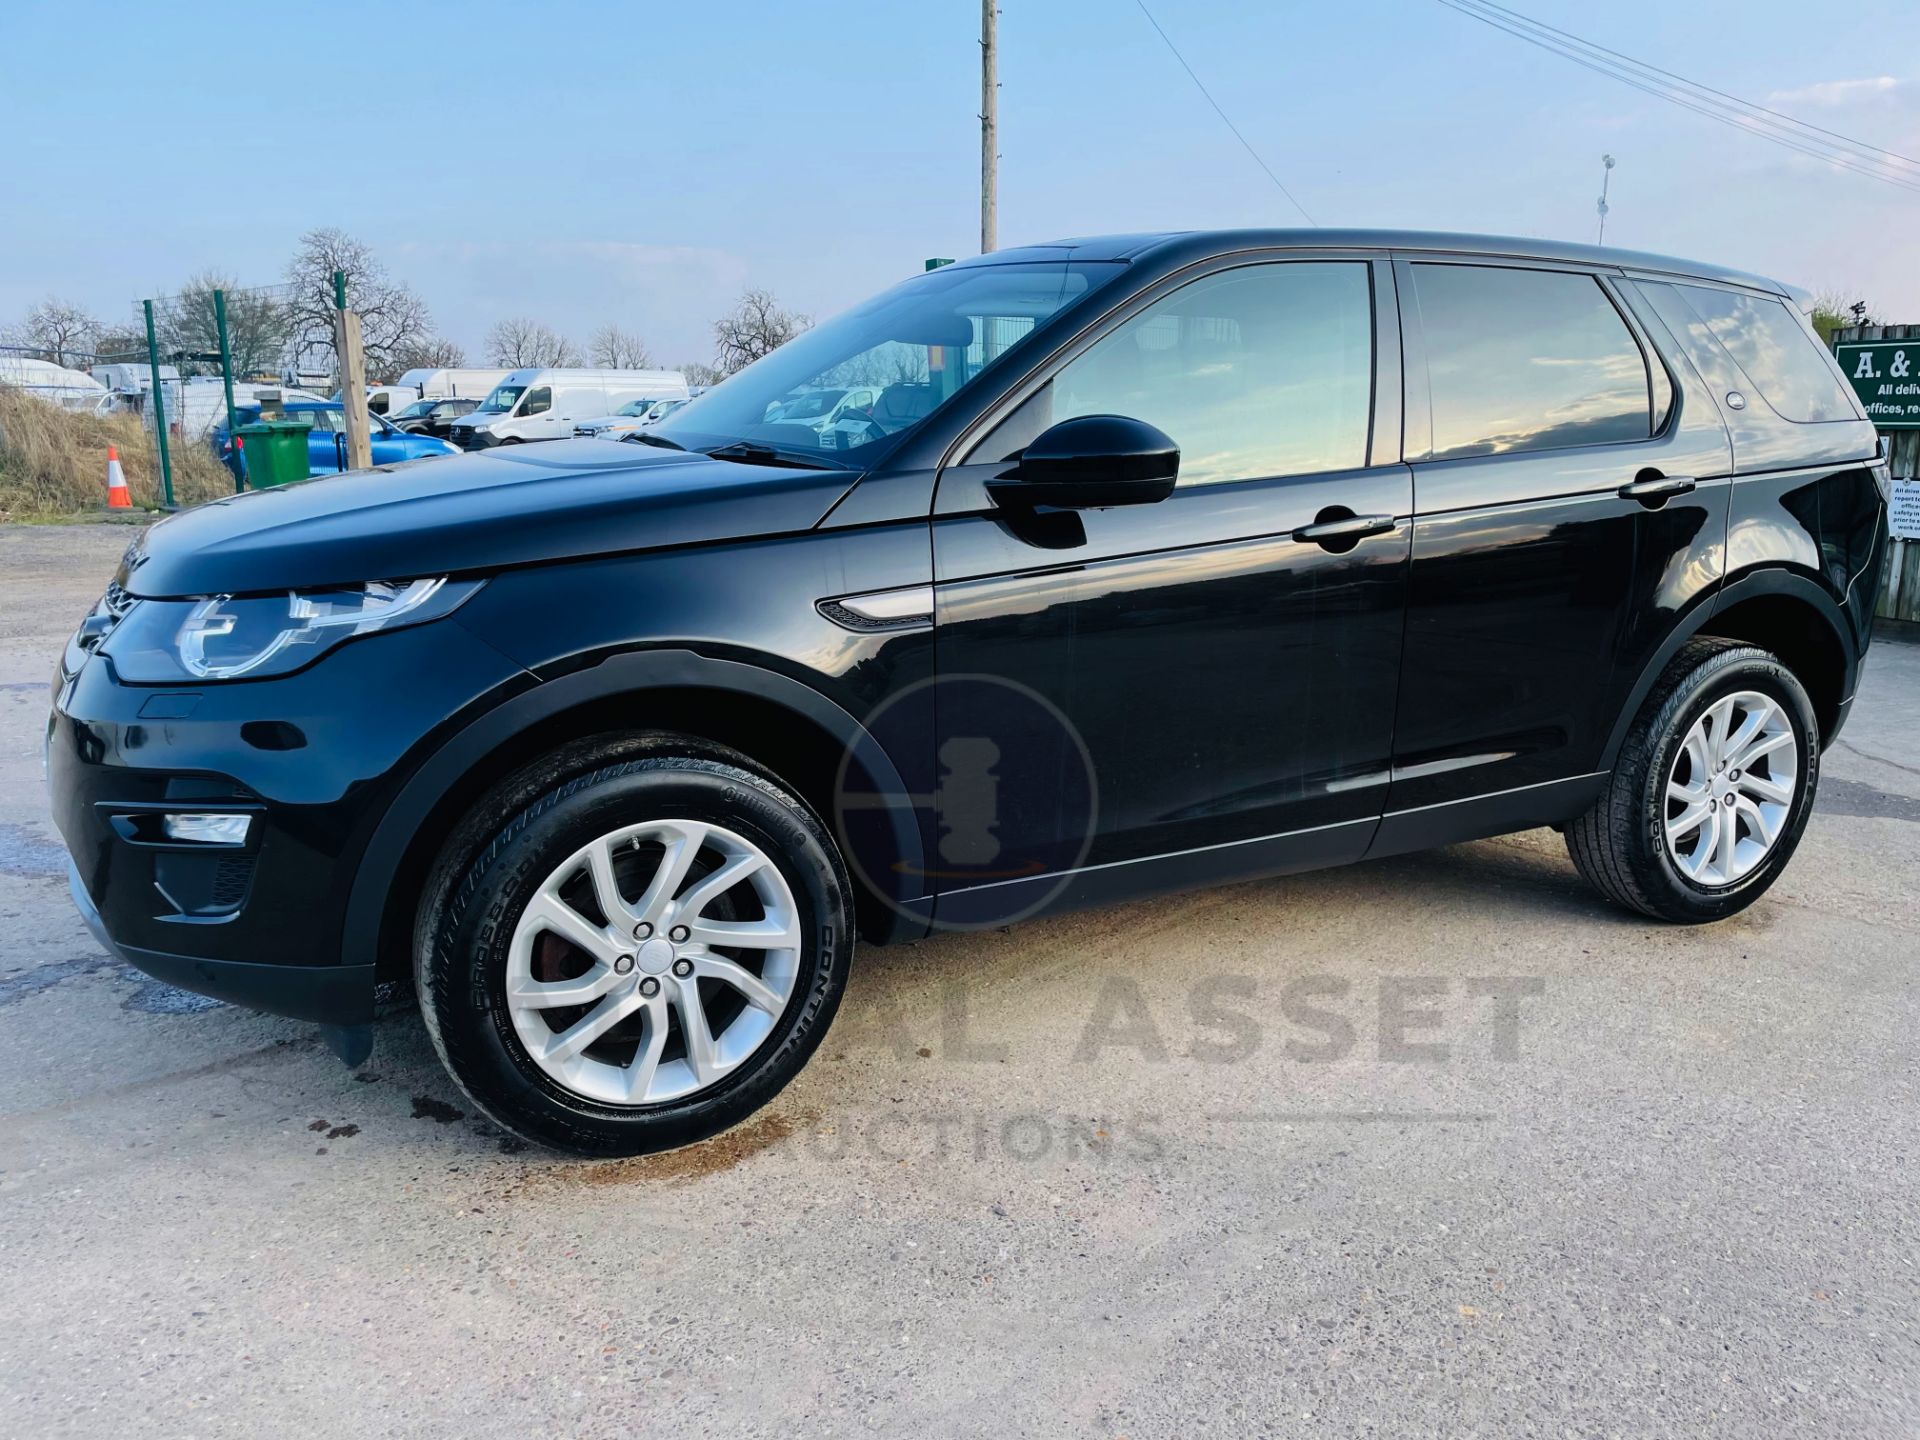 (On Sale) LAND ROVER DISCOVERY SPORT *SE TECH* 7 SEATER SUV (2018 - EURO 6) TD4 - AUTO *LOW MILEAGE* - Image 7 of 35